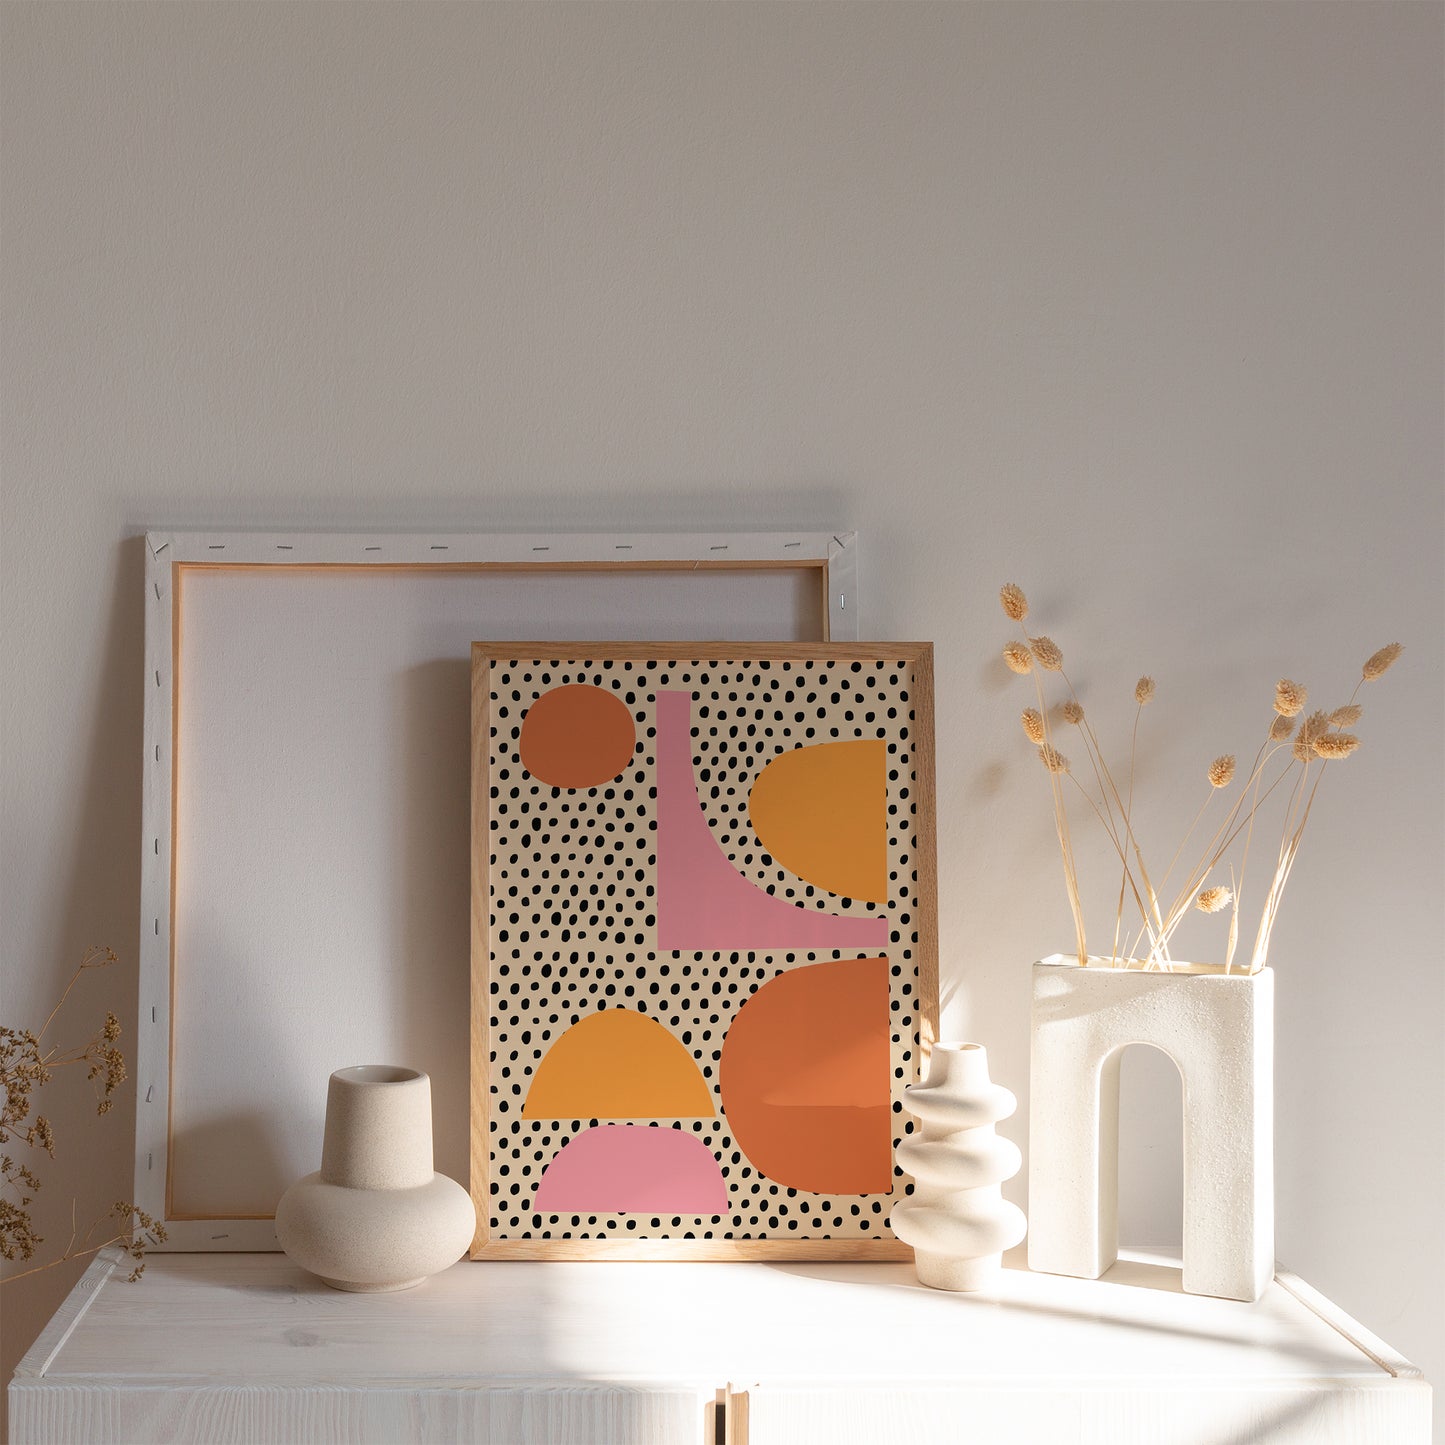 Abstract Contemporary Composition Print